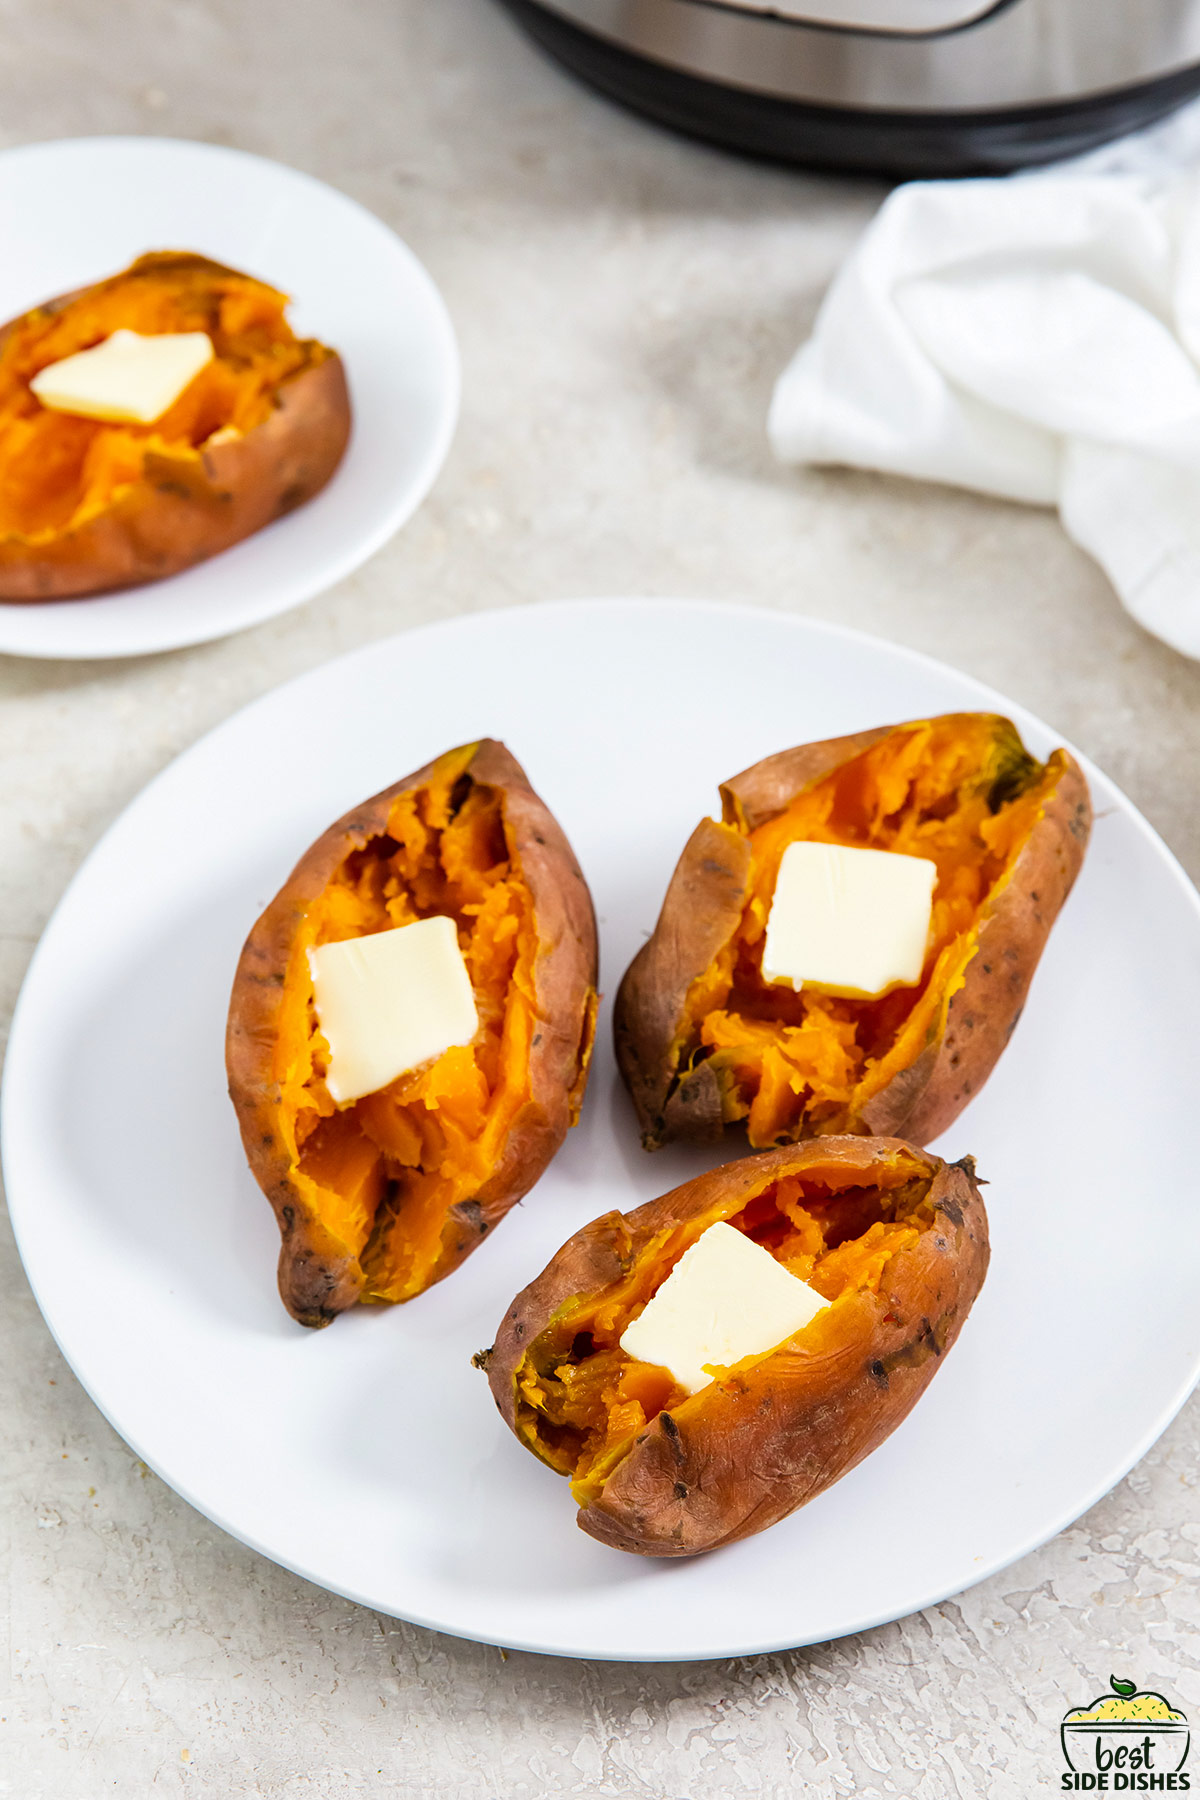 three sweet potatoes on a plate with cut open skin and a pat of butter on each potato, next to another plate with another sweet potato.